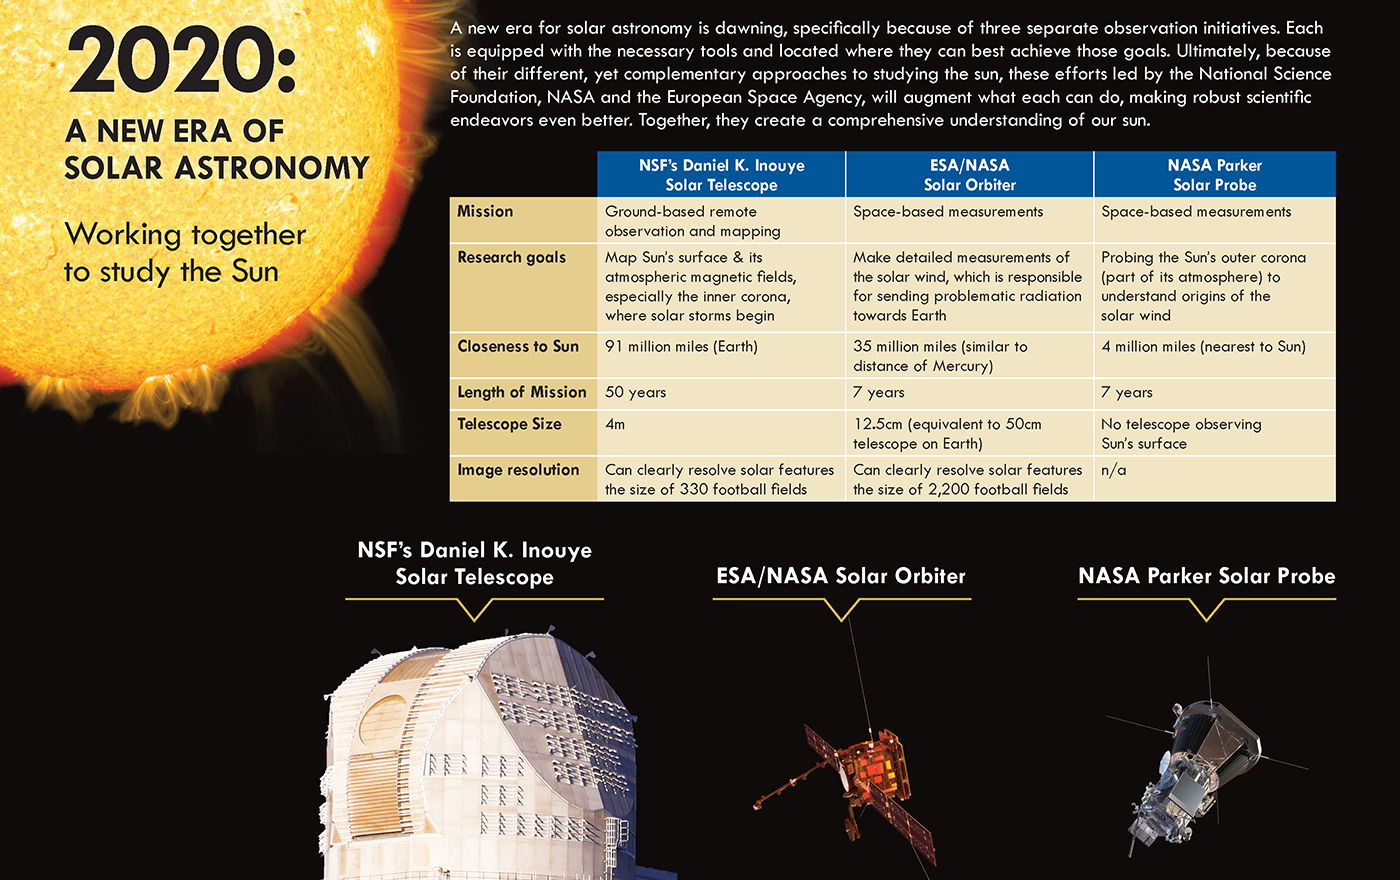 Comparison of the capabilities of three solar astronomy instruments